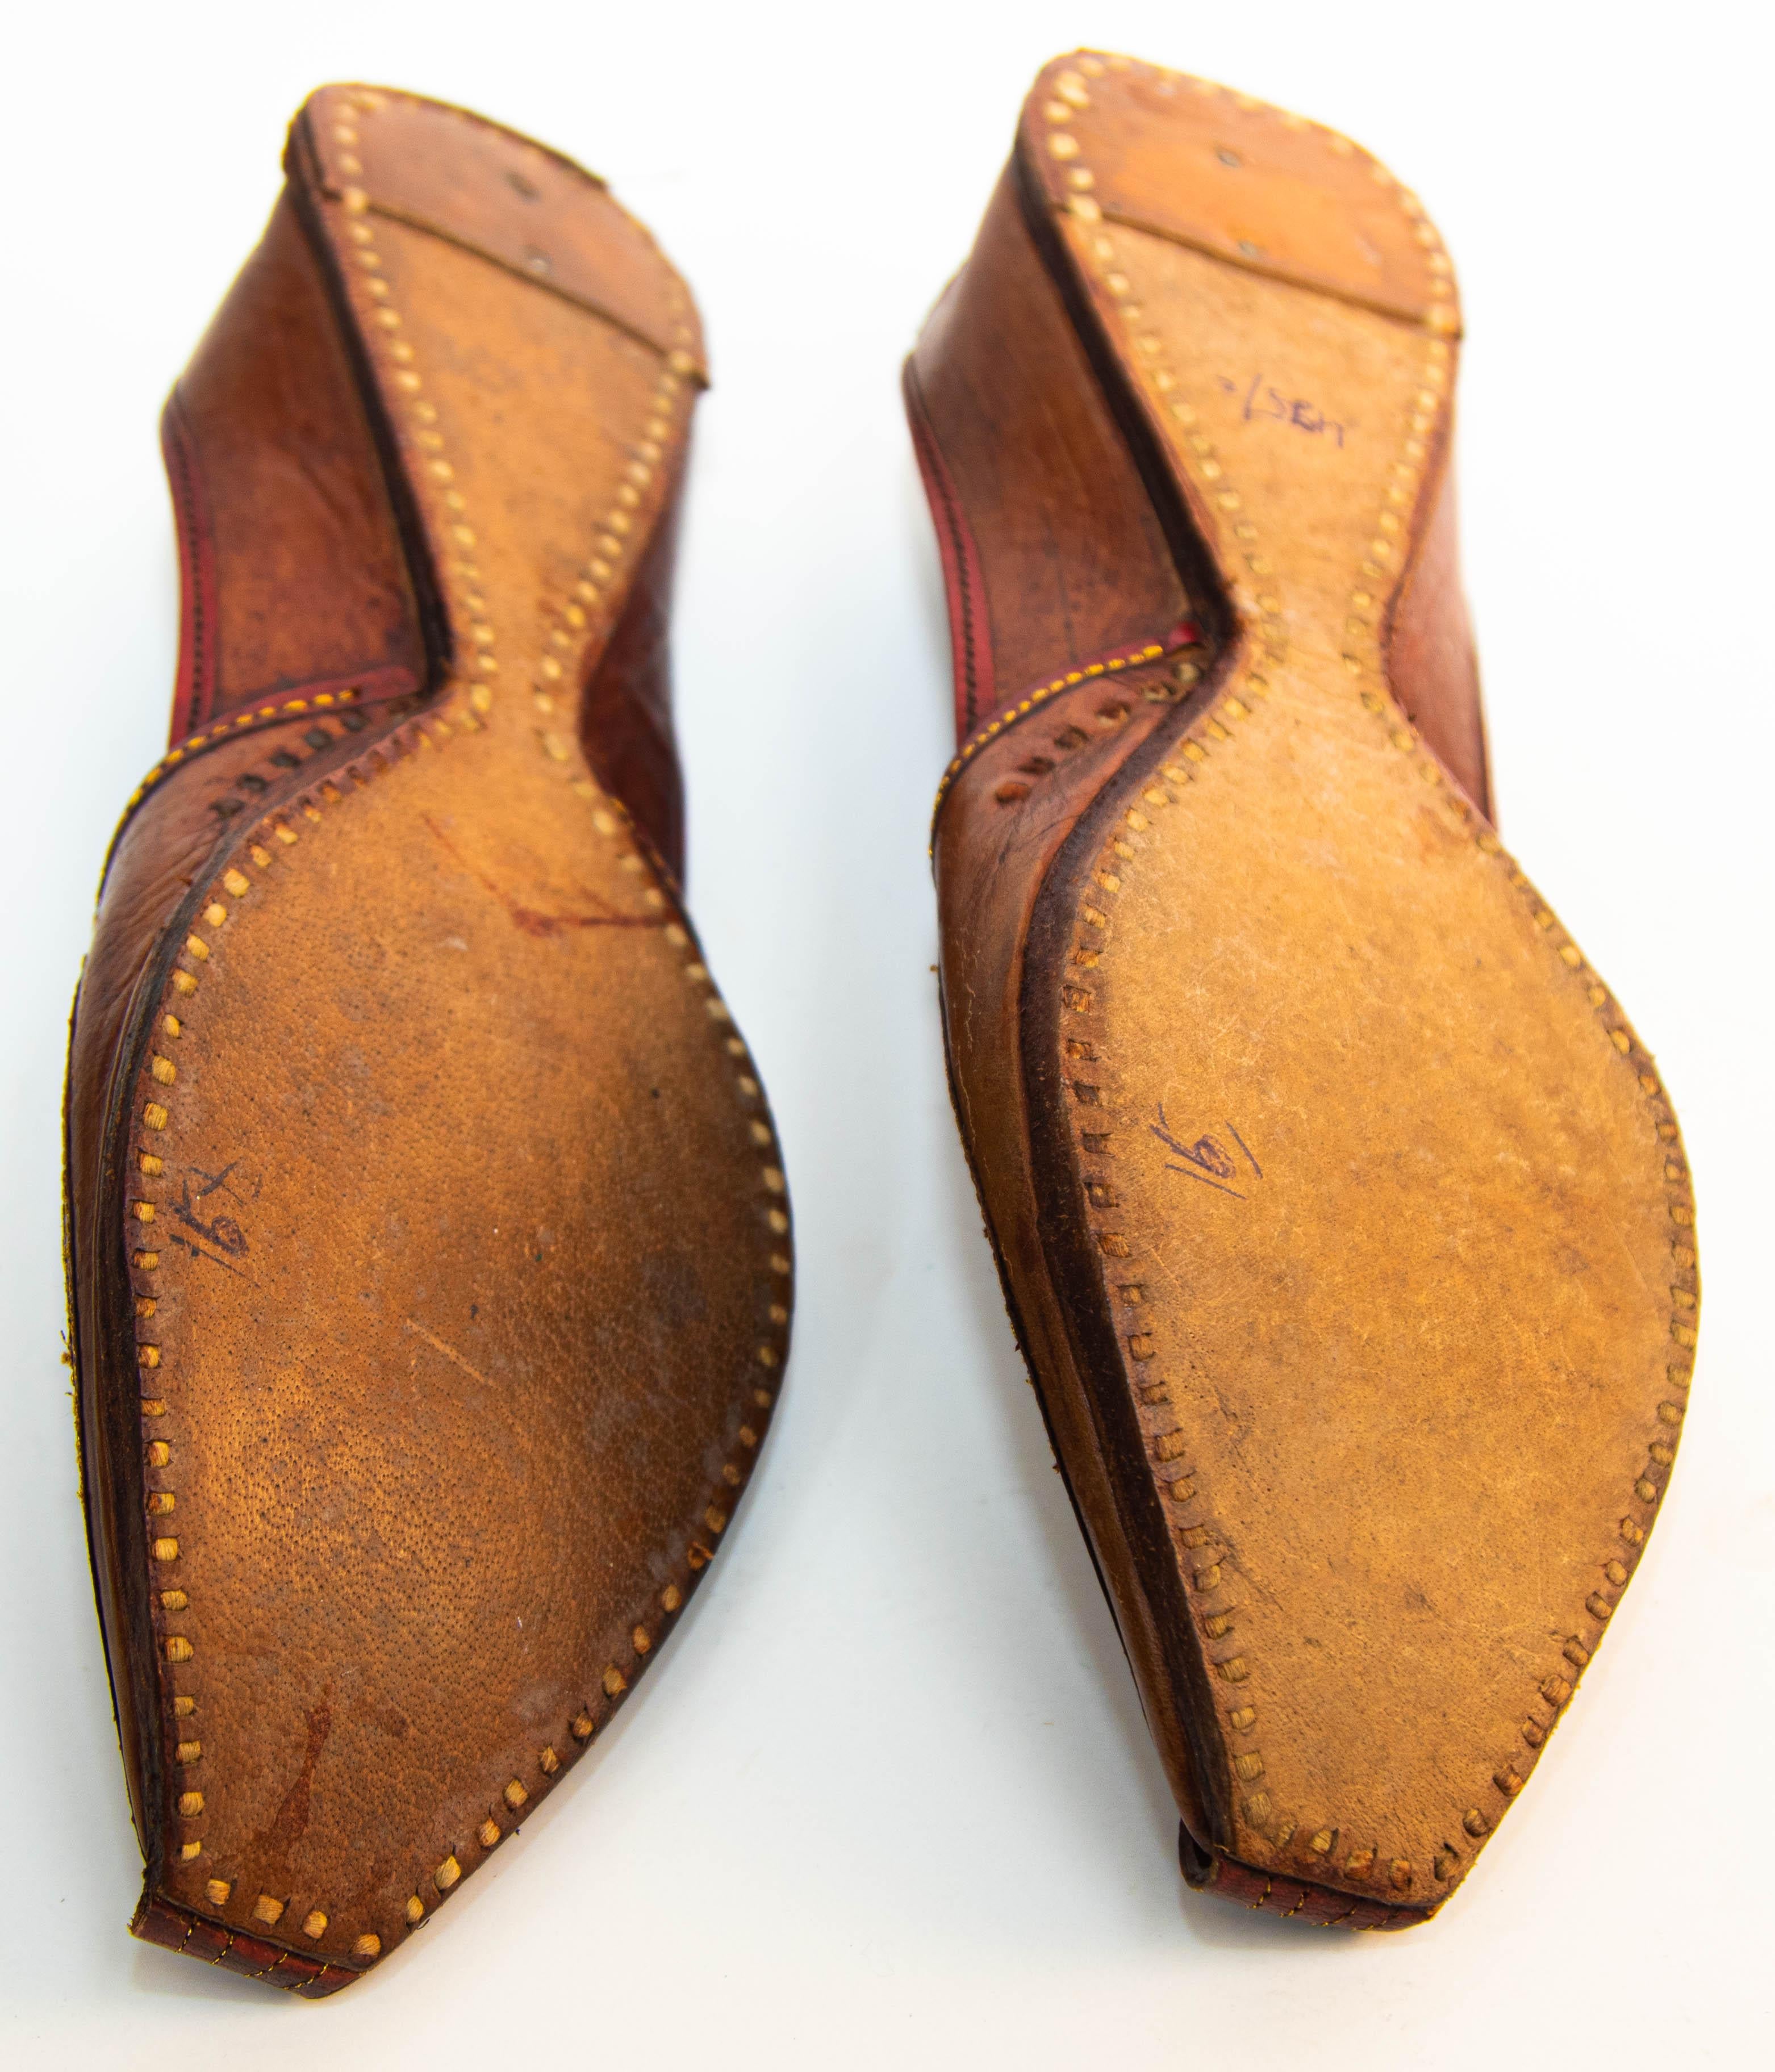 Vintage Arabian Mughal Leather Shoes with Gold Embroidered Curled Toe In Good Condition For Sale In North Hollywood, CA